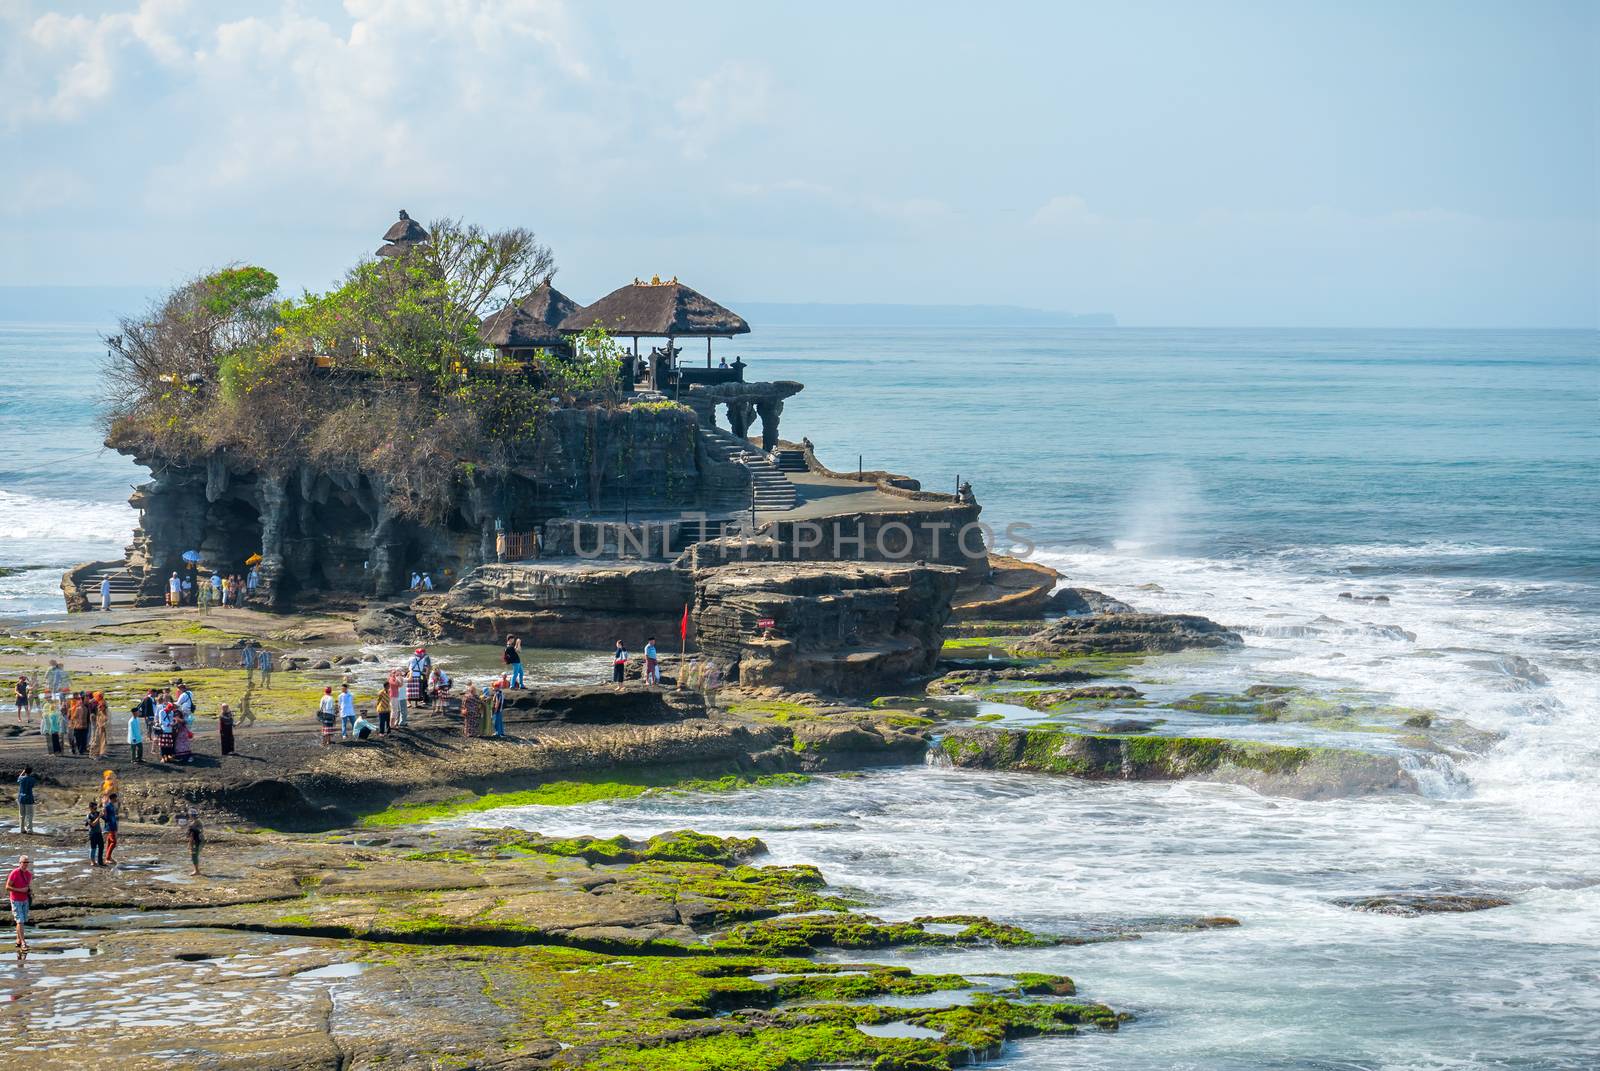 The temple "Tanah Lot" on the island of Bali, Indonesia